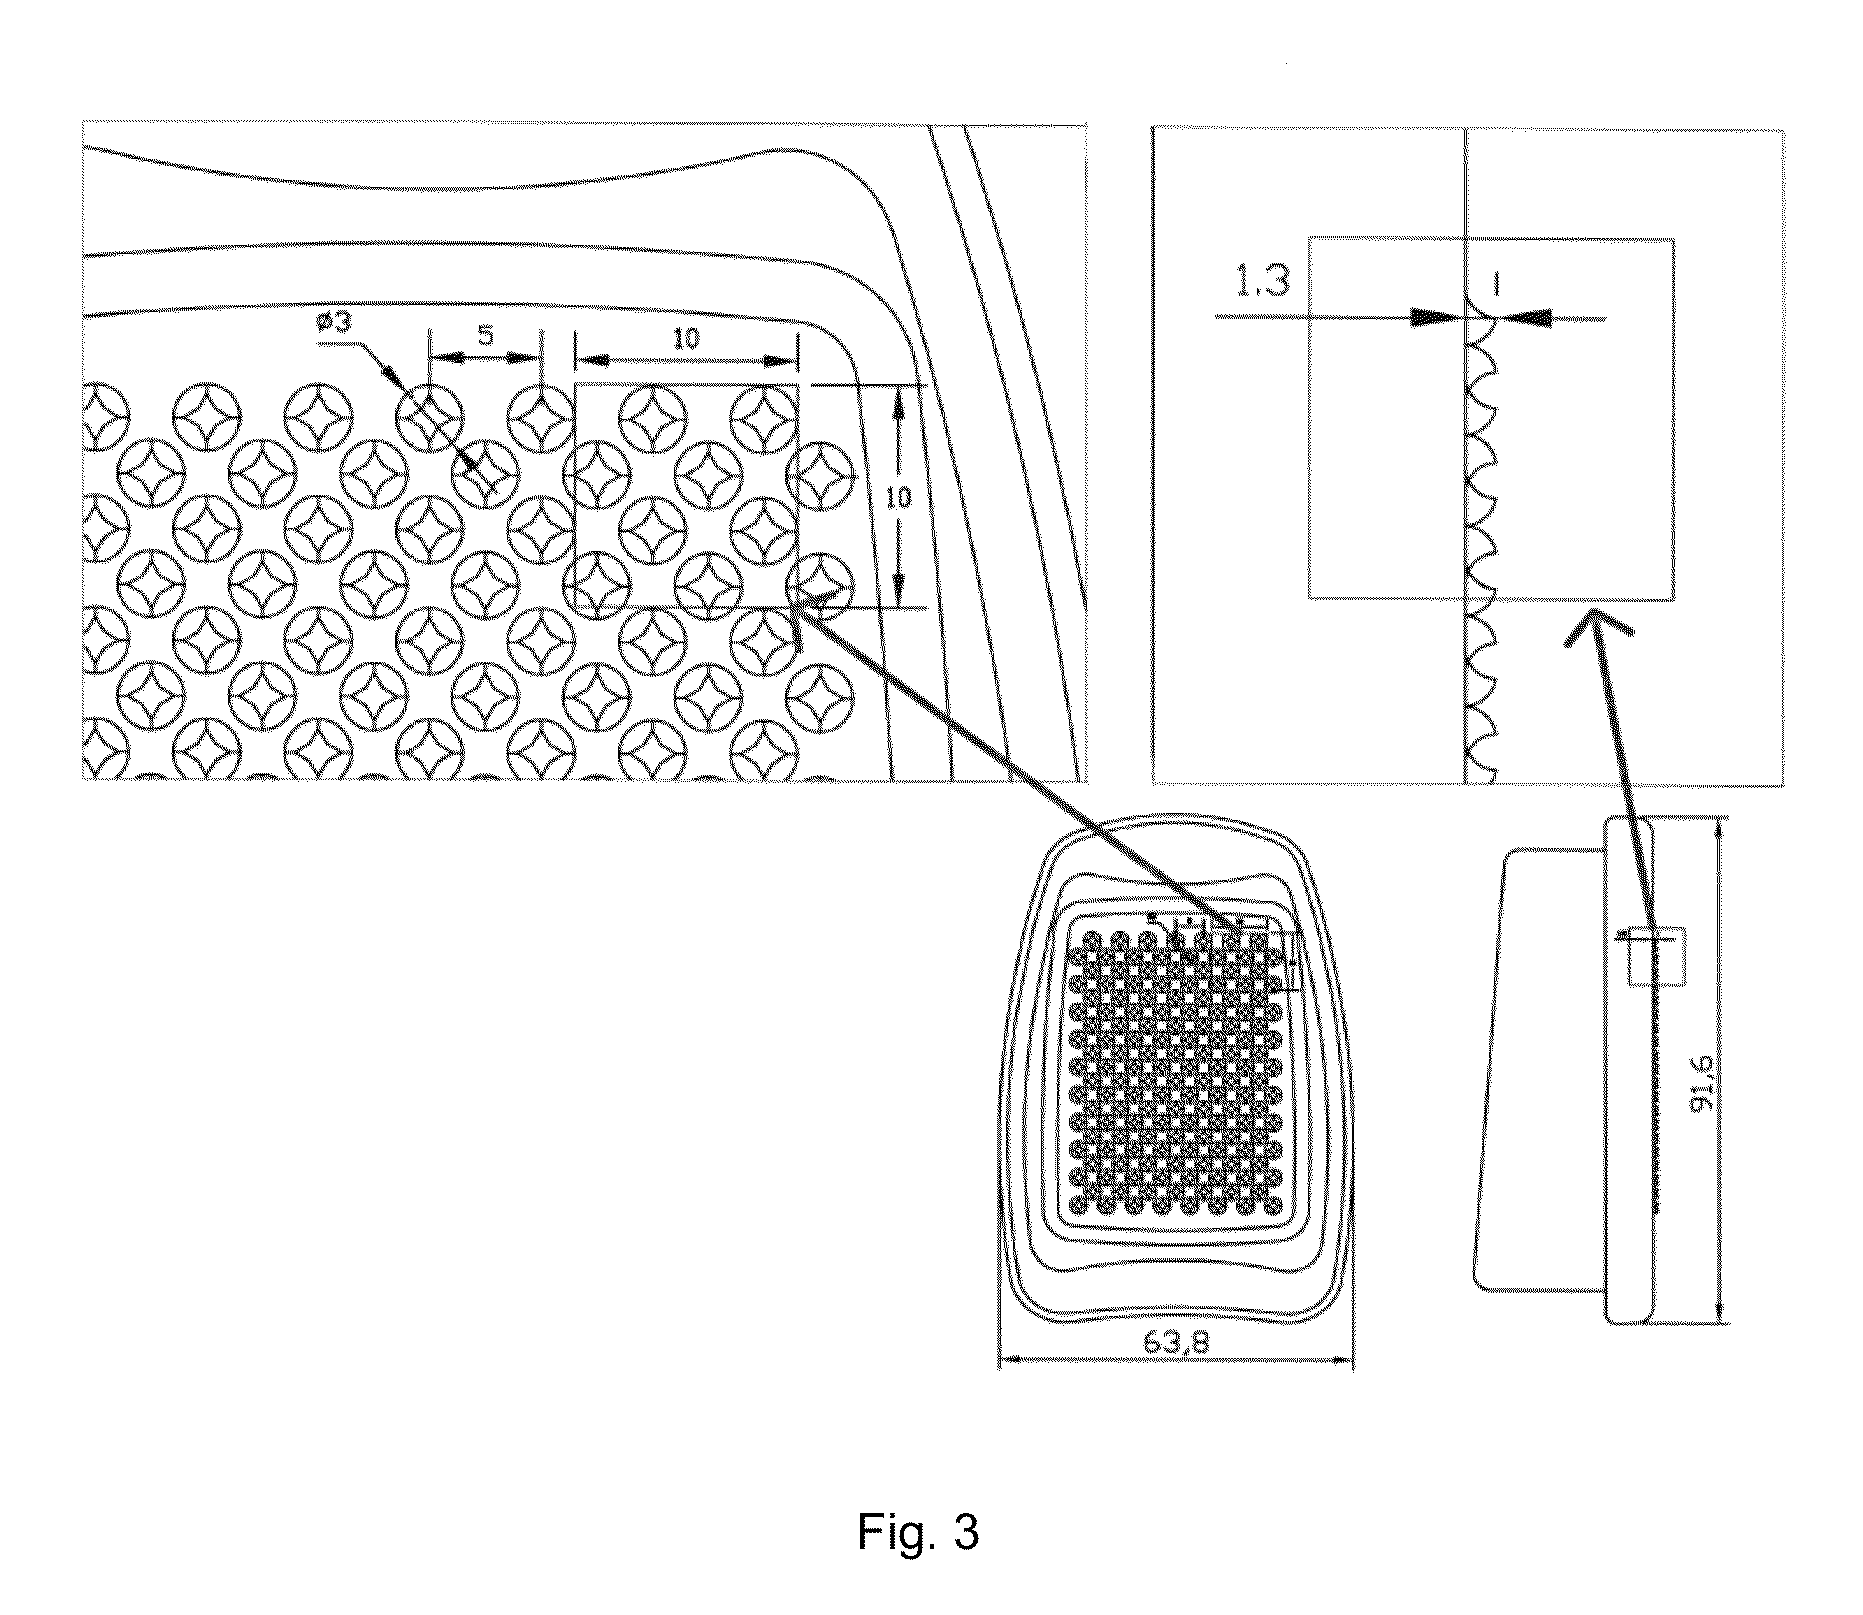 Abuse-deterrent pharmaceutical compositions for controlled release